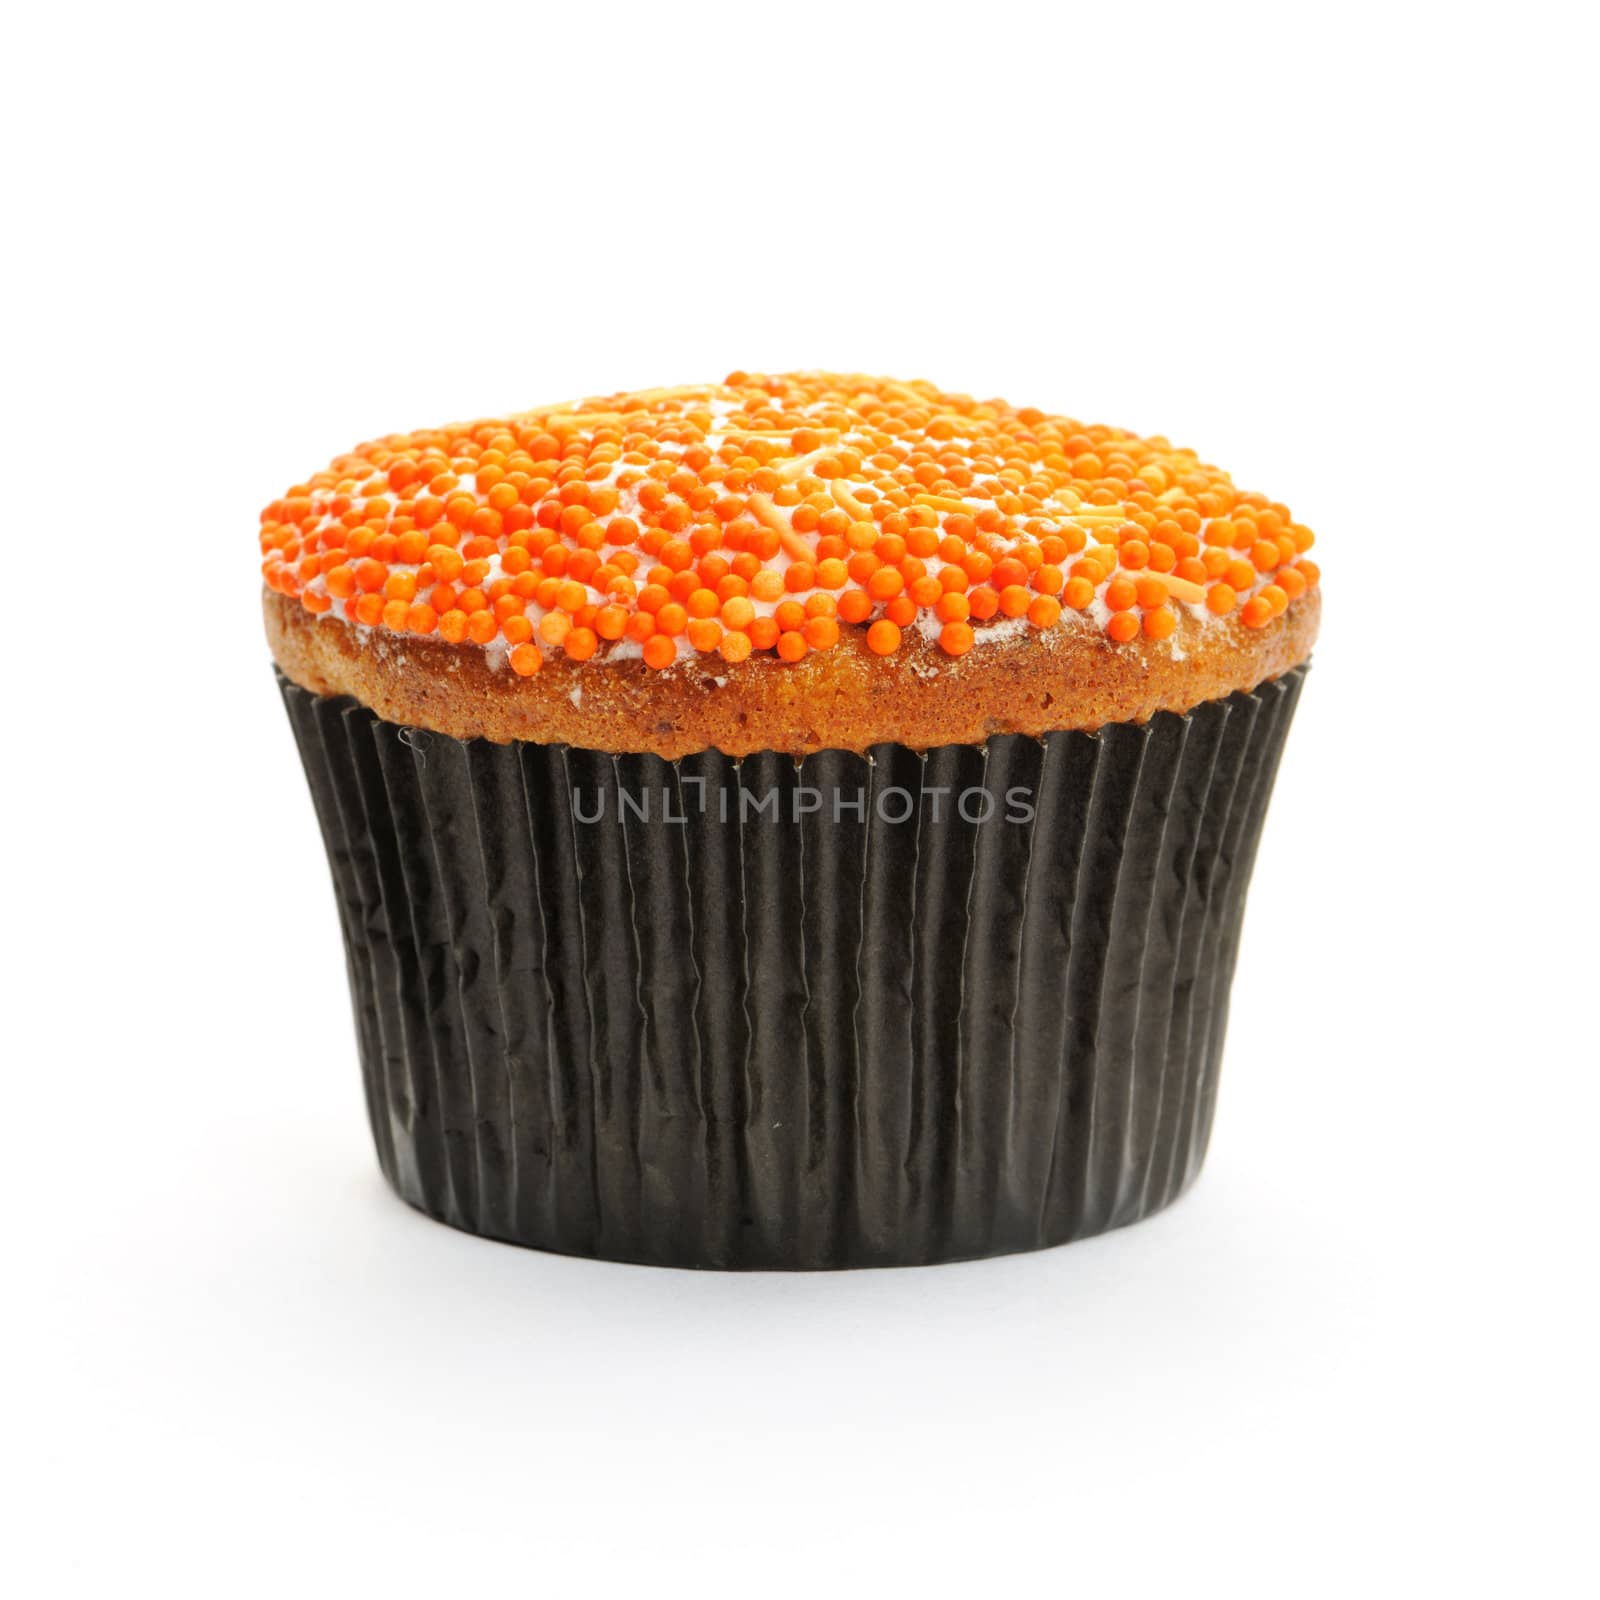 Cupcake with orange icing by haveseen